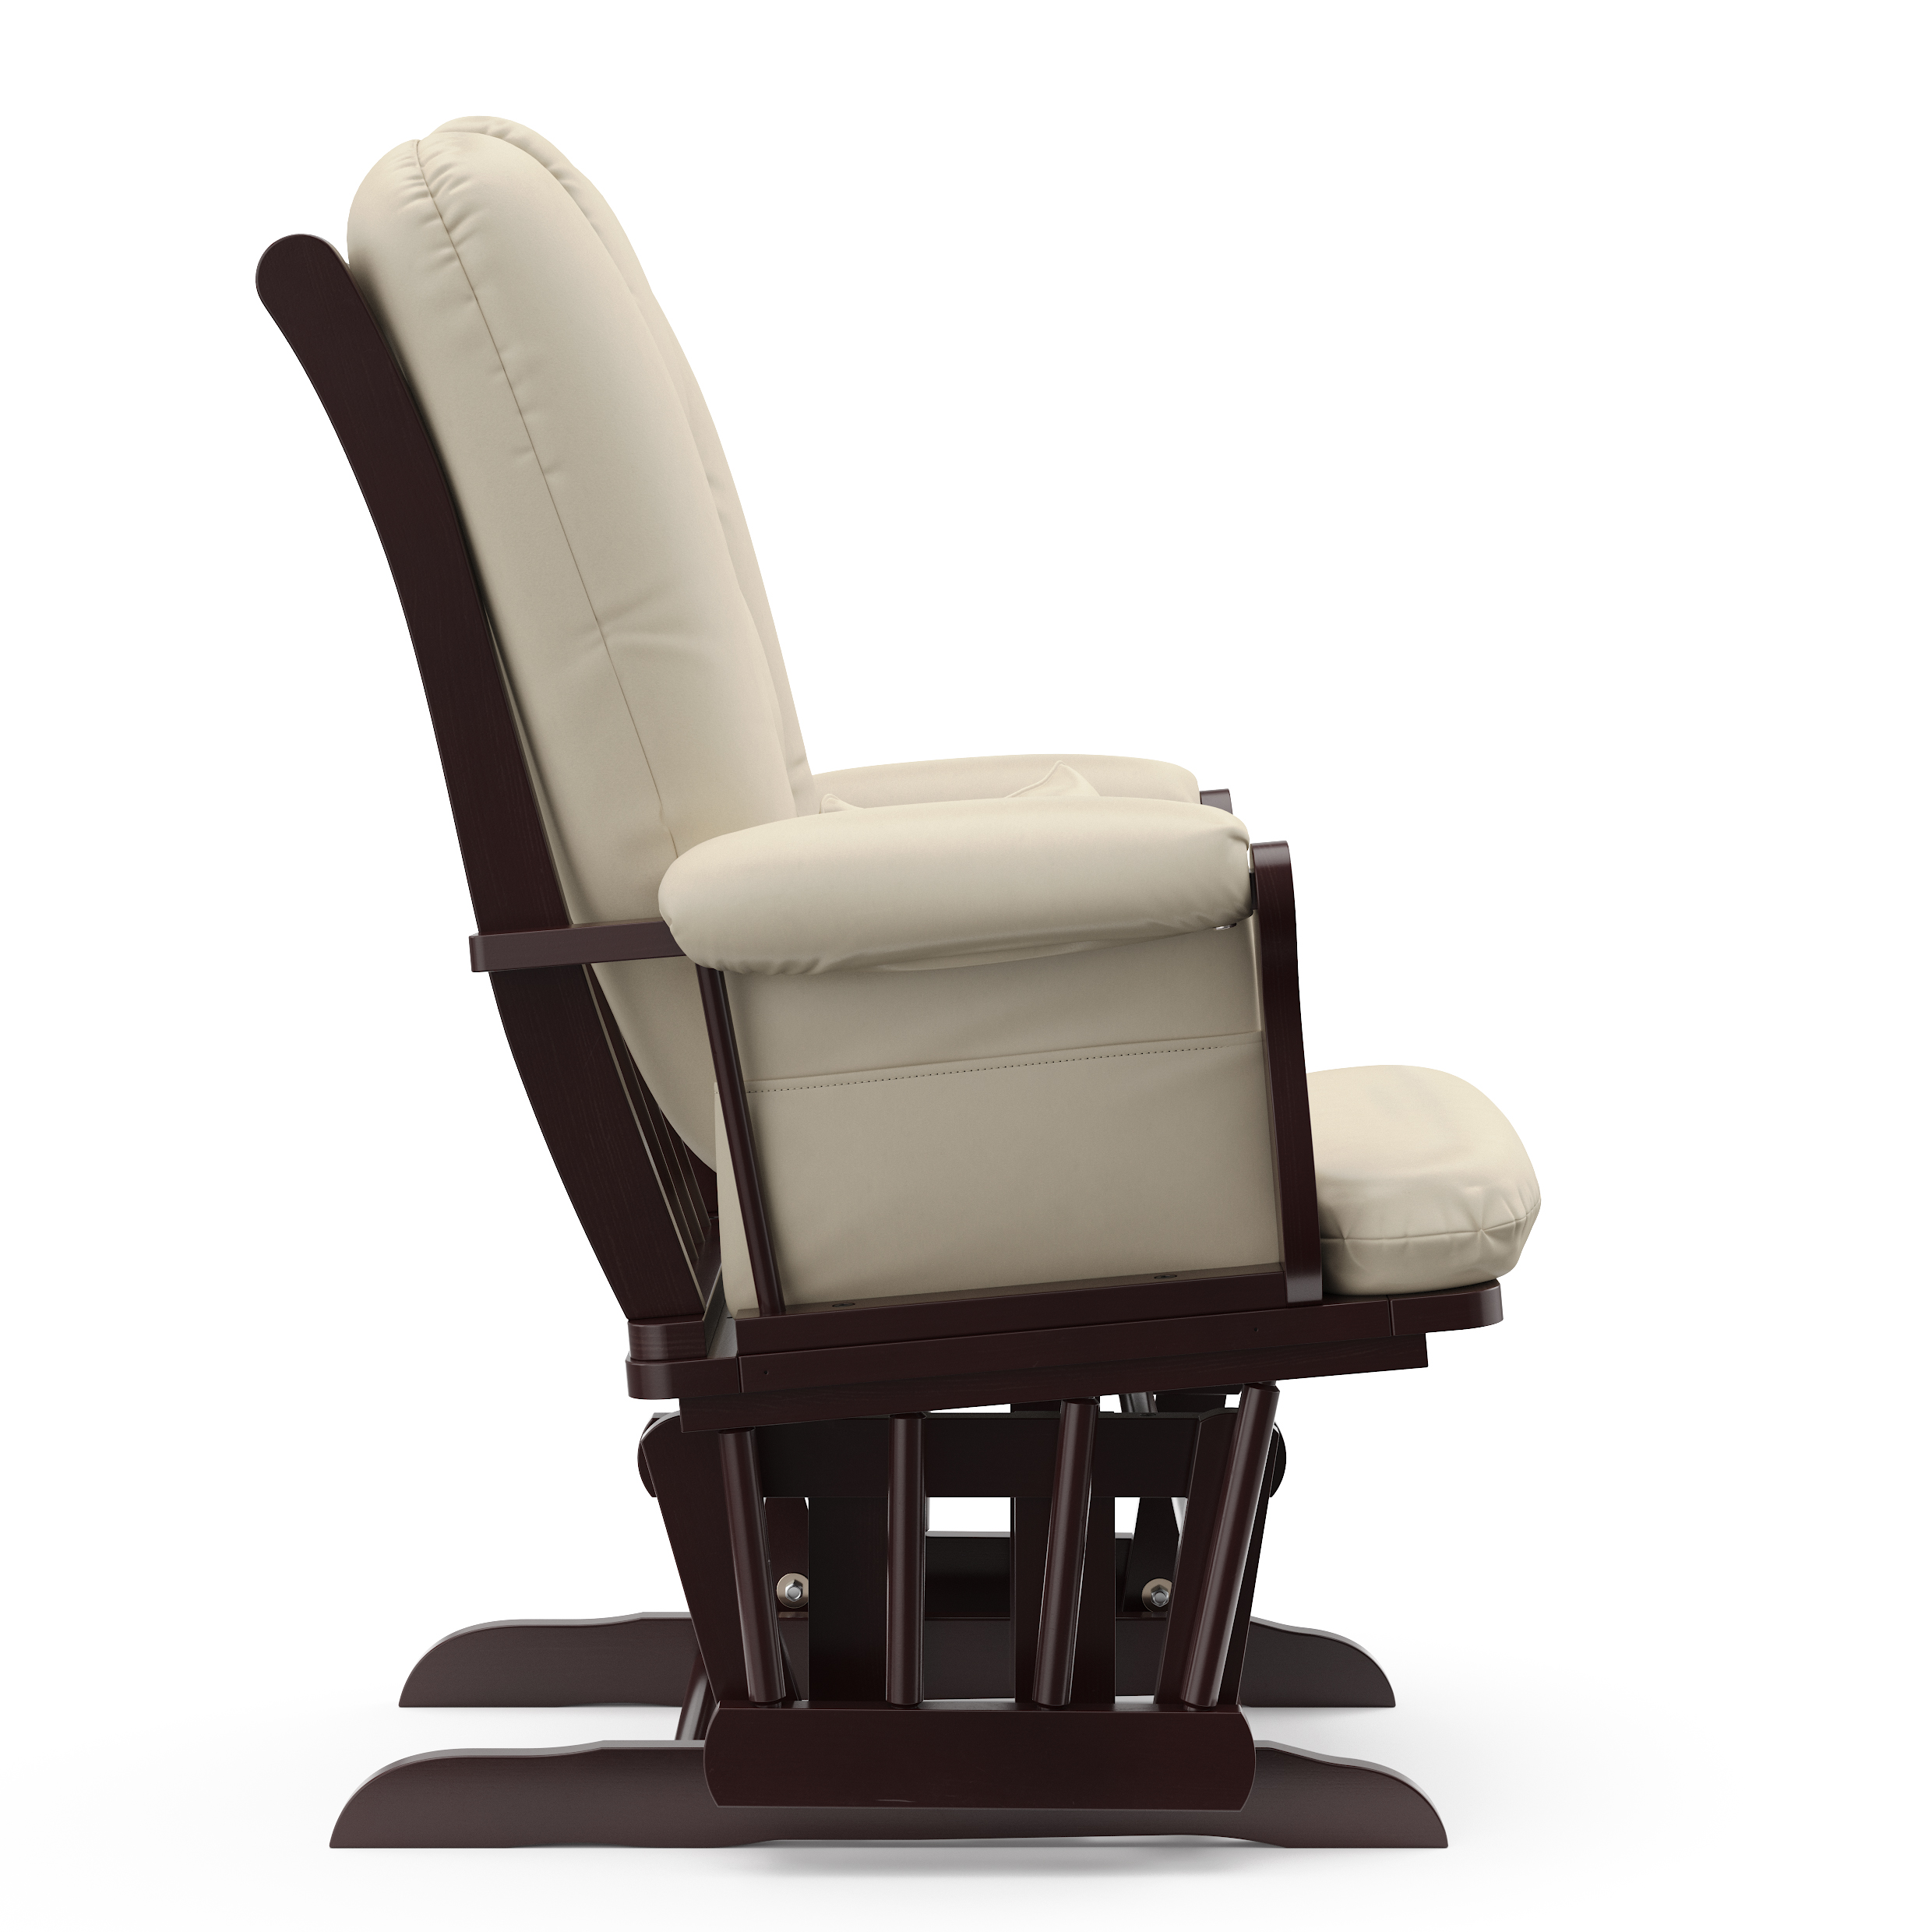 Storkcraft Tuscany Glider and Ottoman with Lower Lumbar Pillow, Espresso Finish with Beige Cushions - image 2 of 7